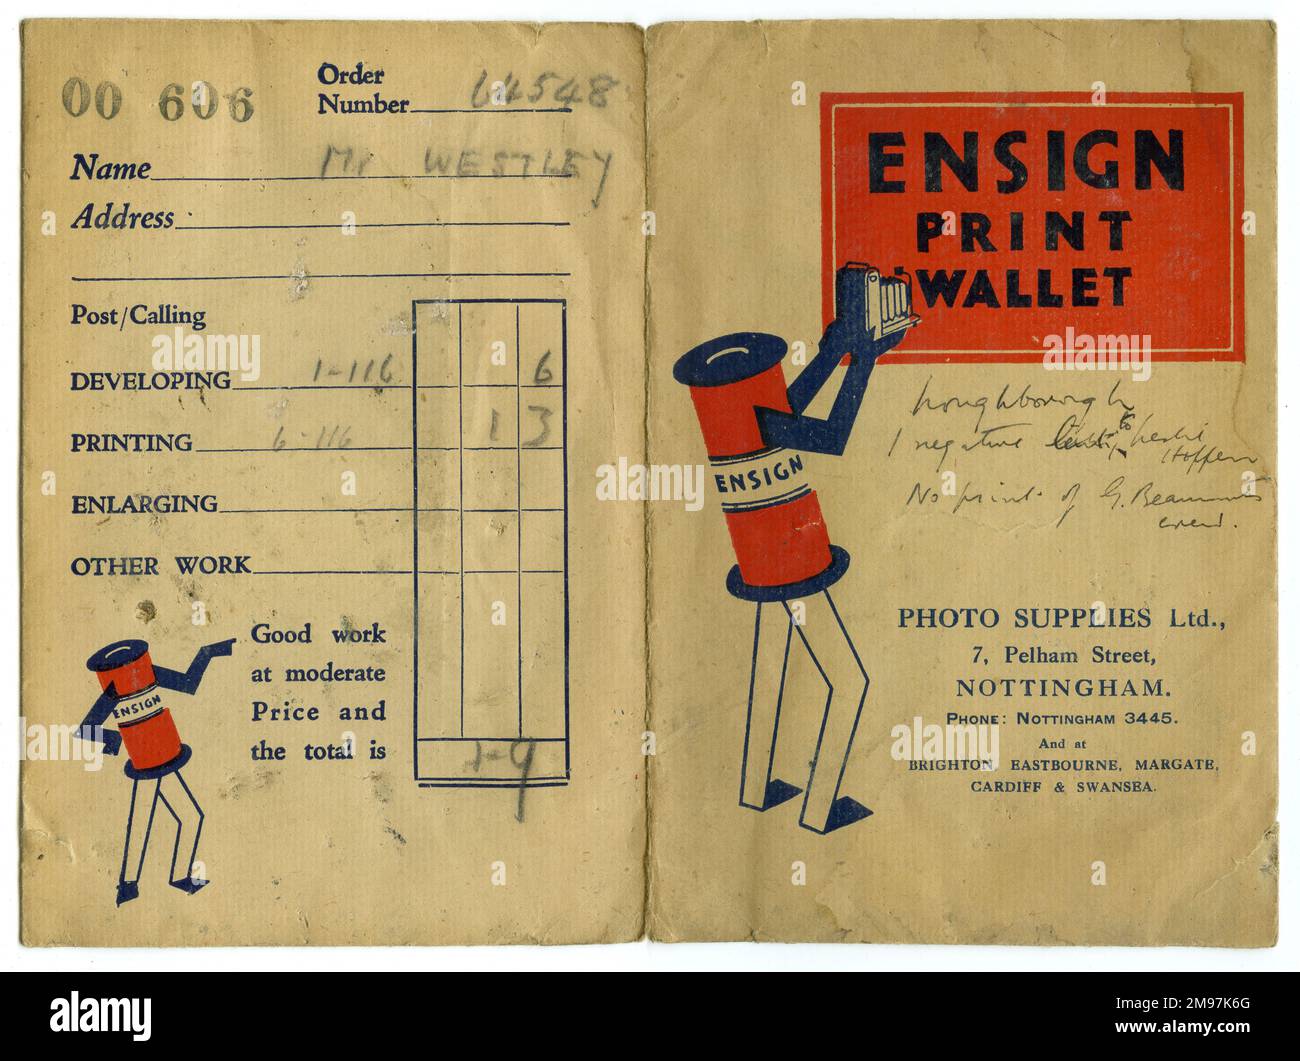 Photographic film wallet advertising Ensign Film, with the developer's name and address: Photo Supplies Ltd, Pelham Street, Nottingham. The customer's name is Mr Westley, and the cost of developing is one shilling and ninepence. Stock Photo